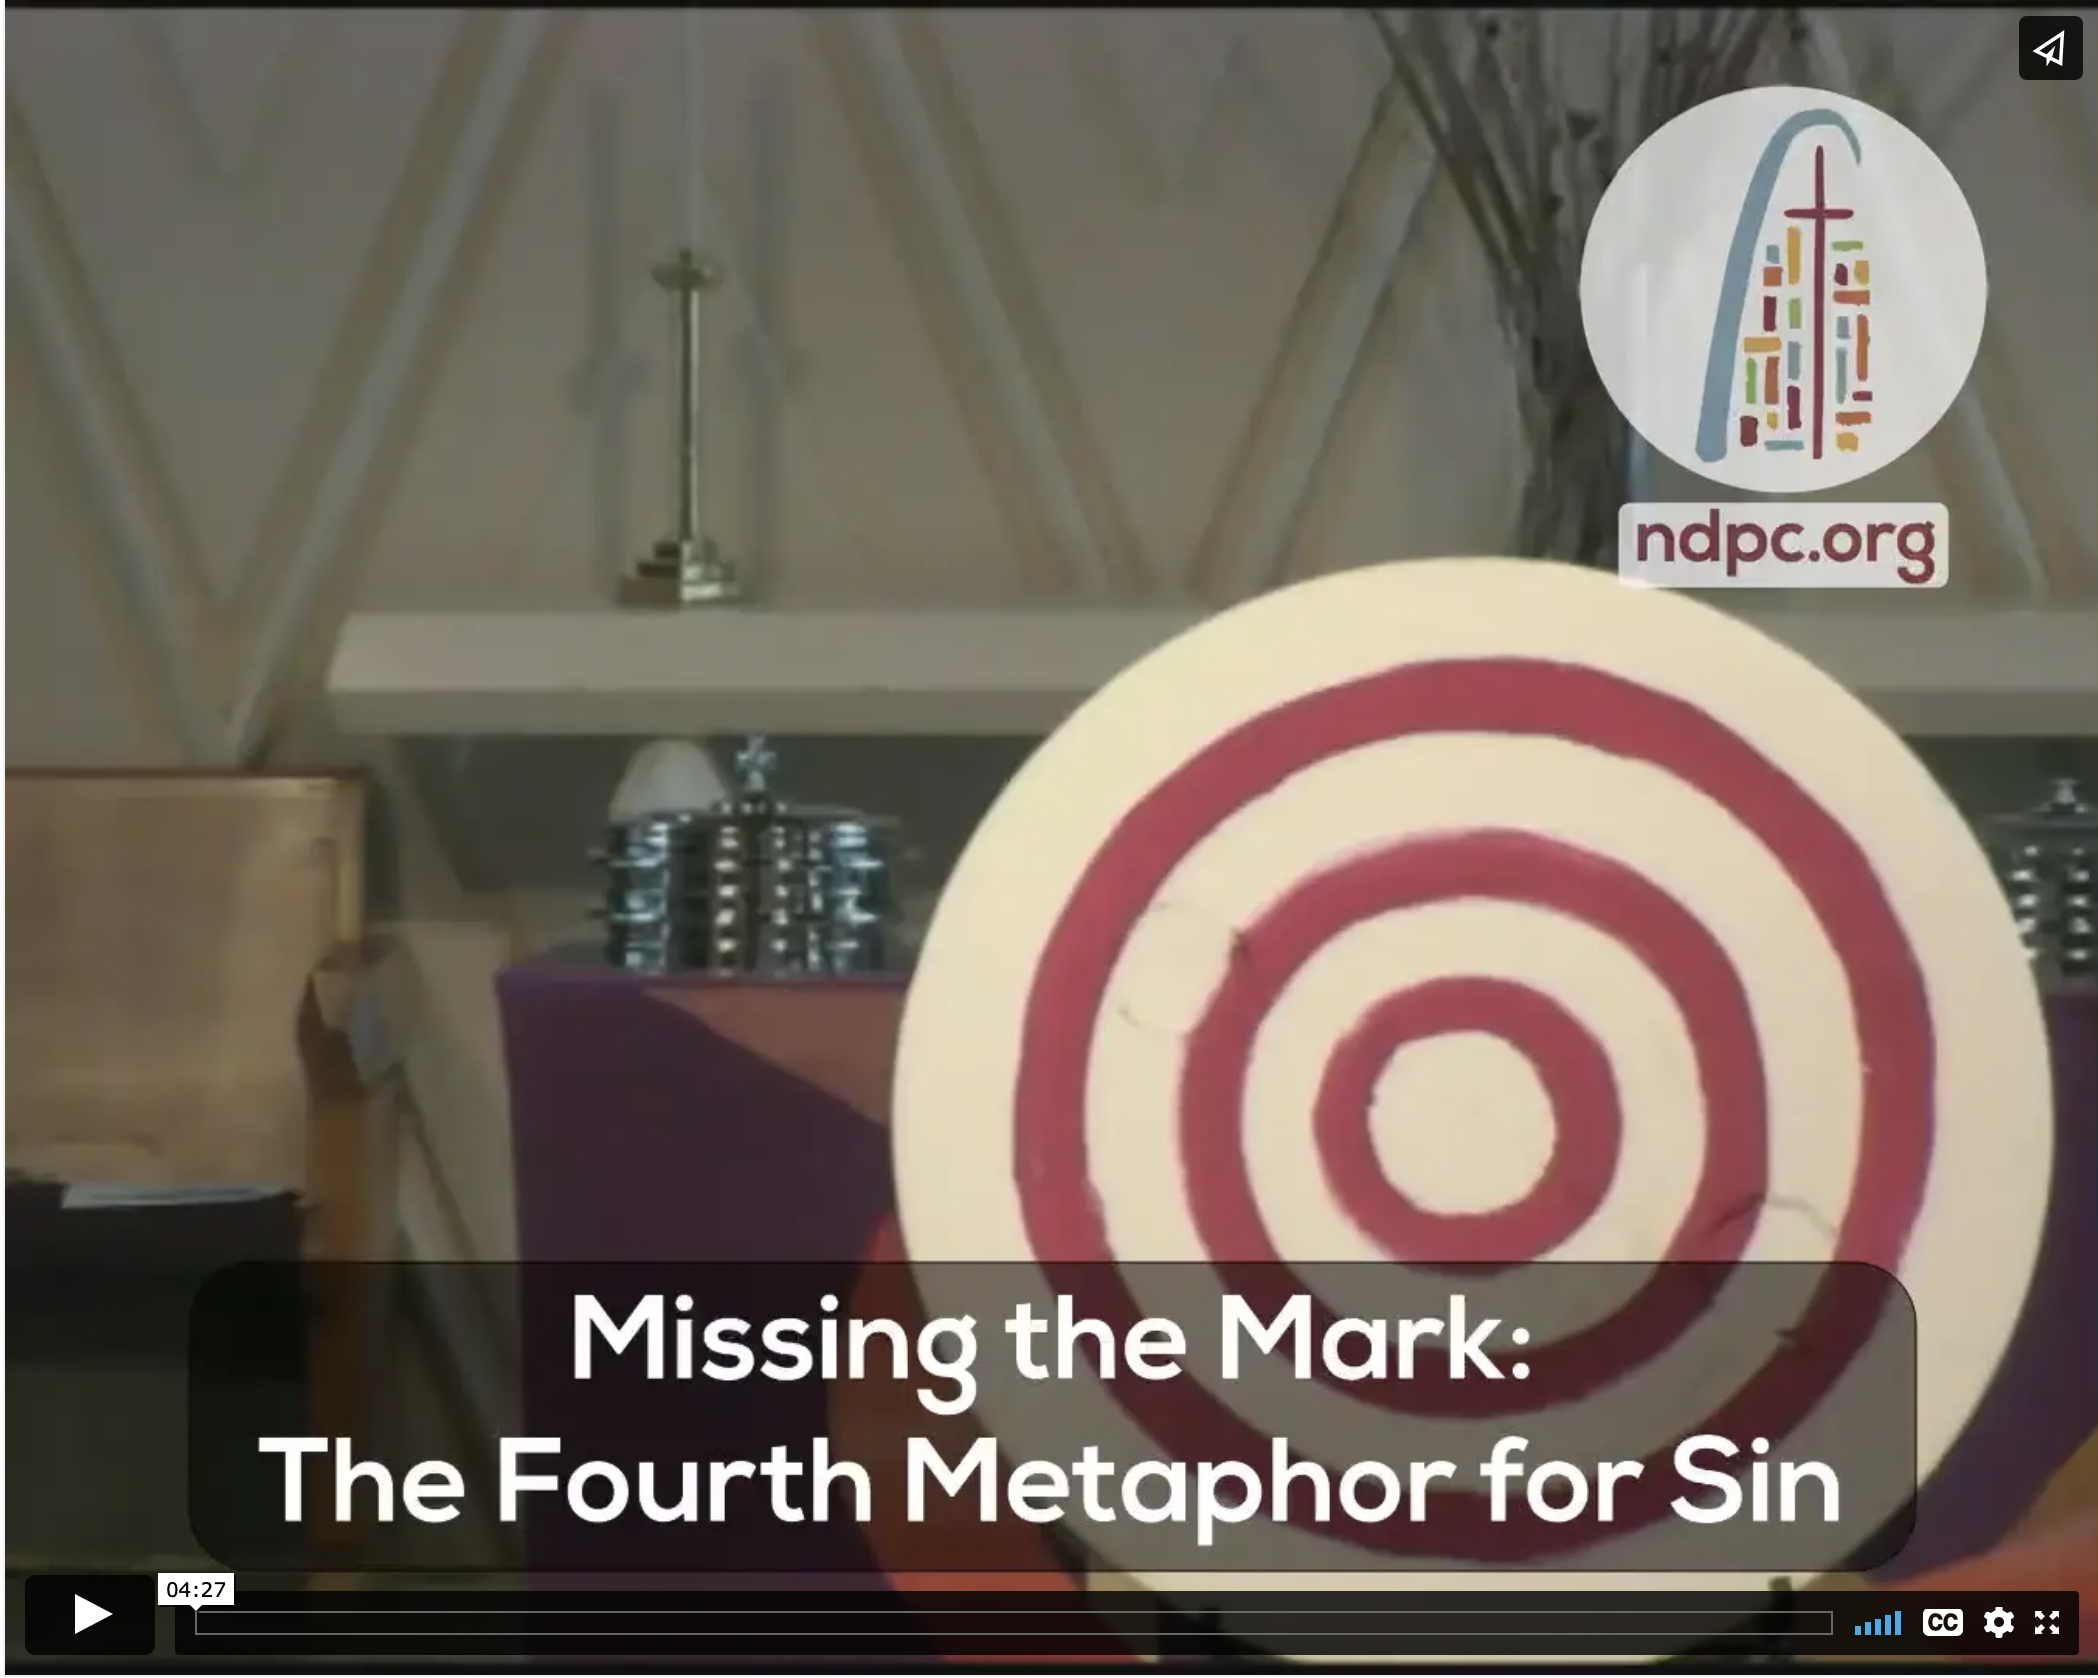 Video link to 4th classical metaphor for Sin: Missed Mark